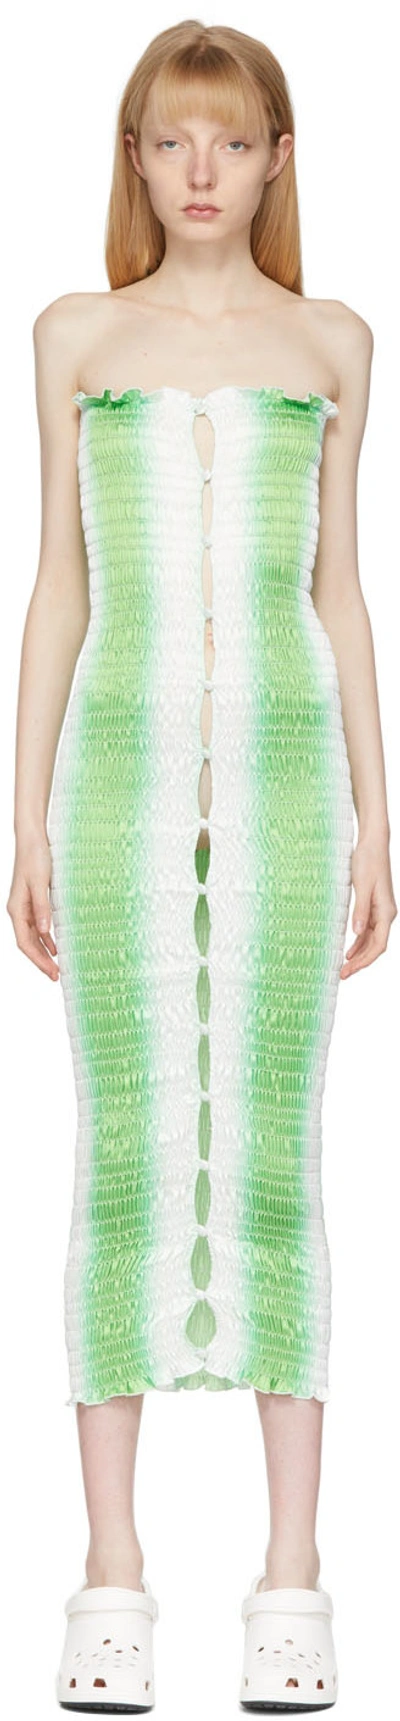 Amy Crookes Green & White Shirred Stretch Tube Dress In 0766 Green/